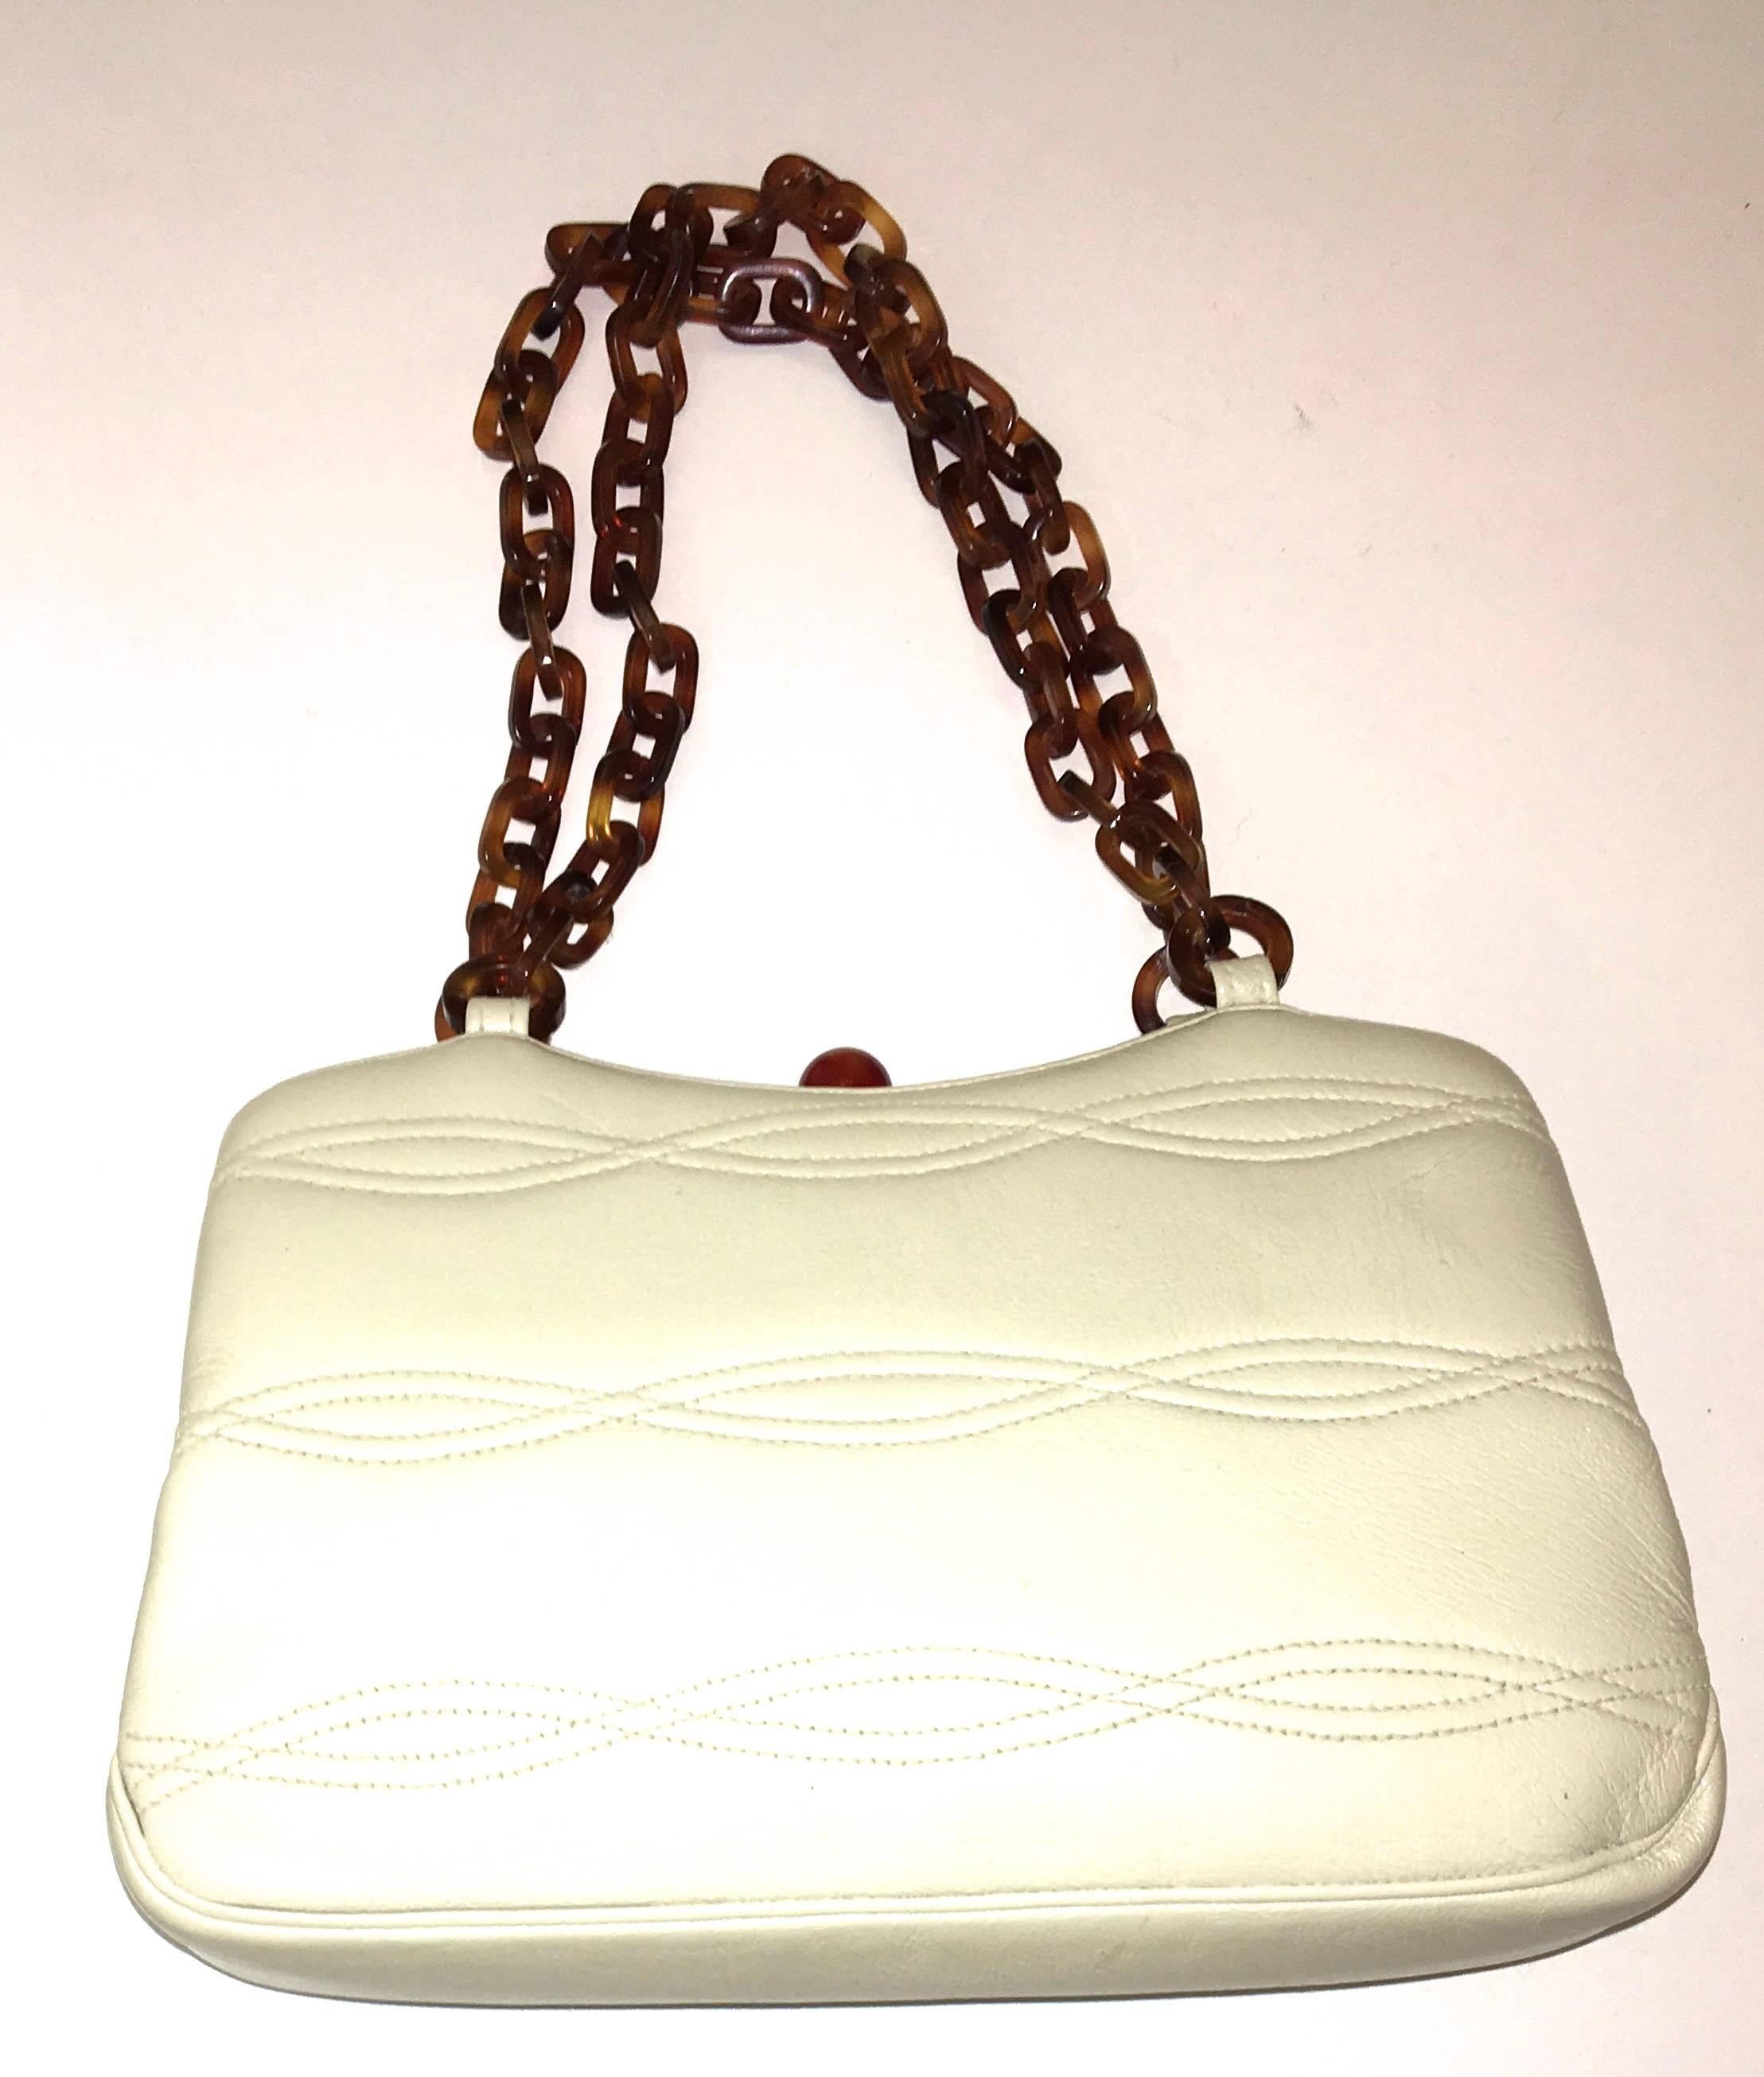 Rare 1950's Morris Moscowitz Beige Leather Purse - Bakelite Hardware In Excellent Condition For Sale In Boca Raton, FL